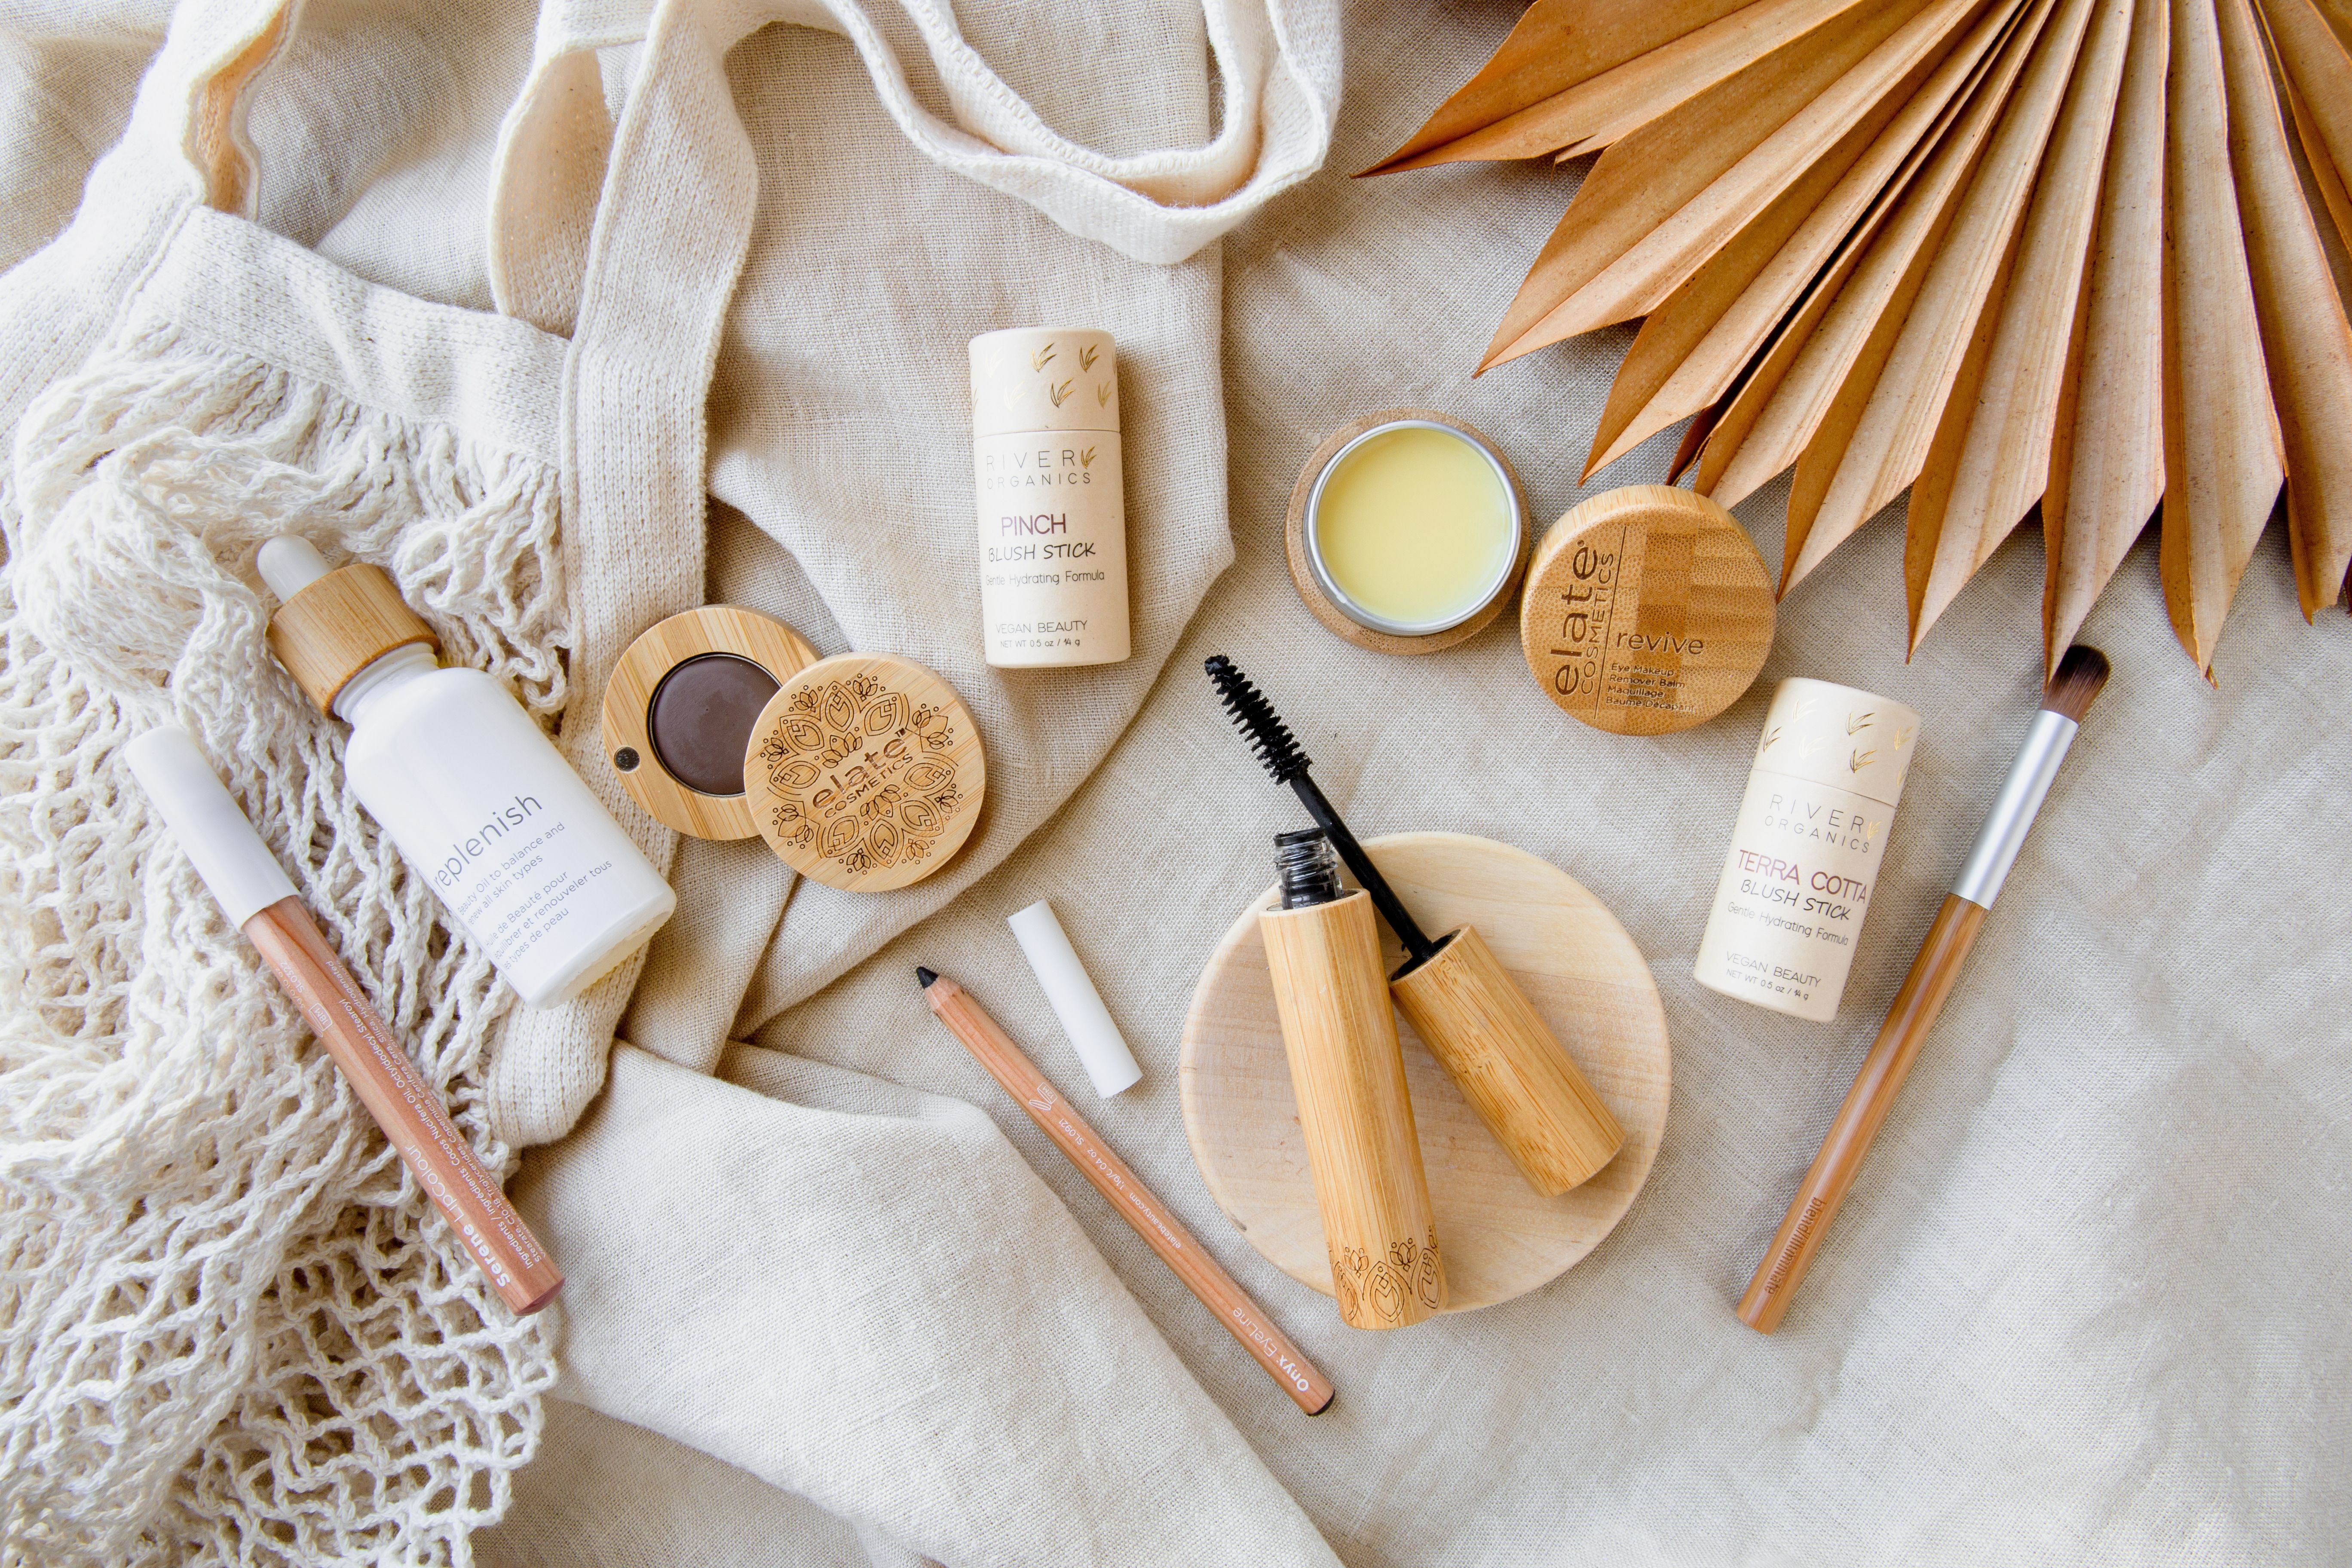 These 11 amazing zero waste makeup brands will help you ‘clean’ up your makeup routine while reducing your plastic consumption without sacrificing quality